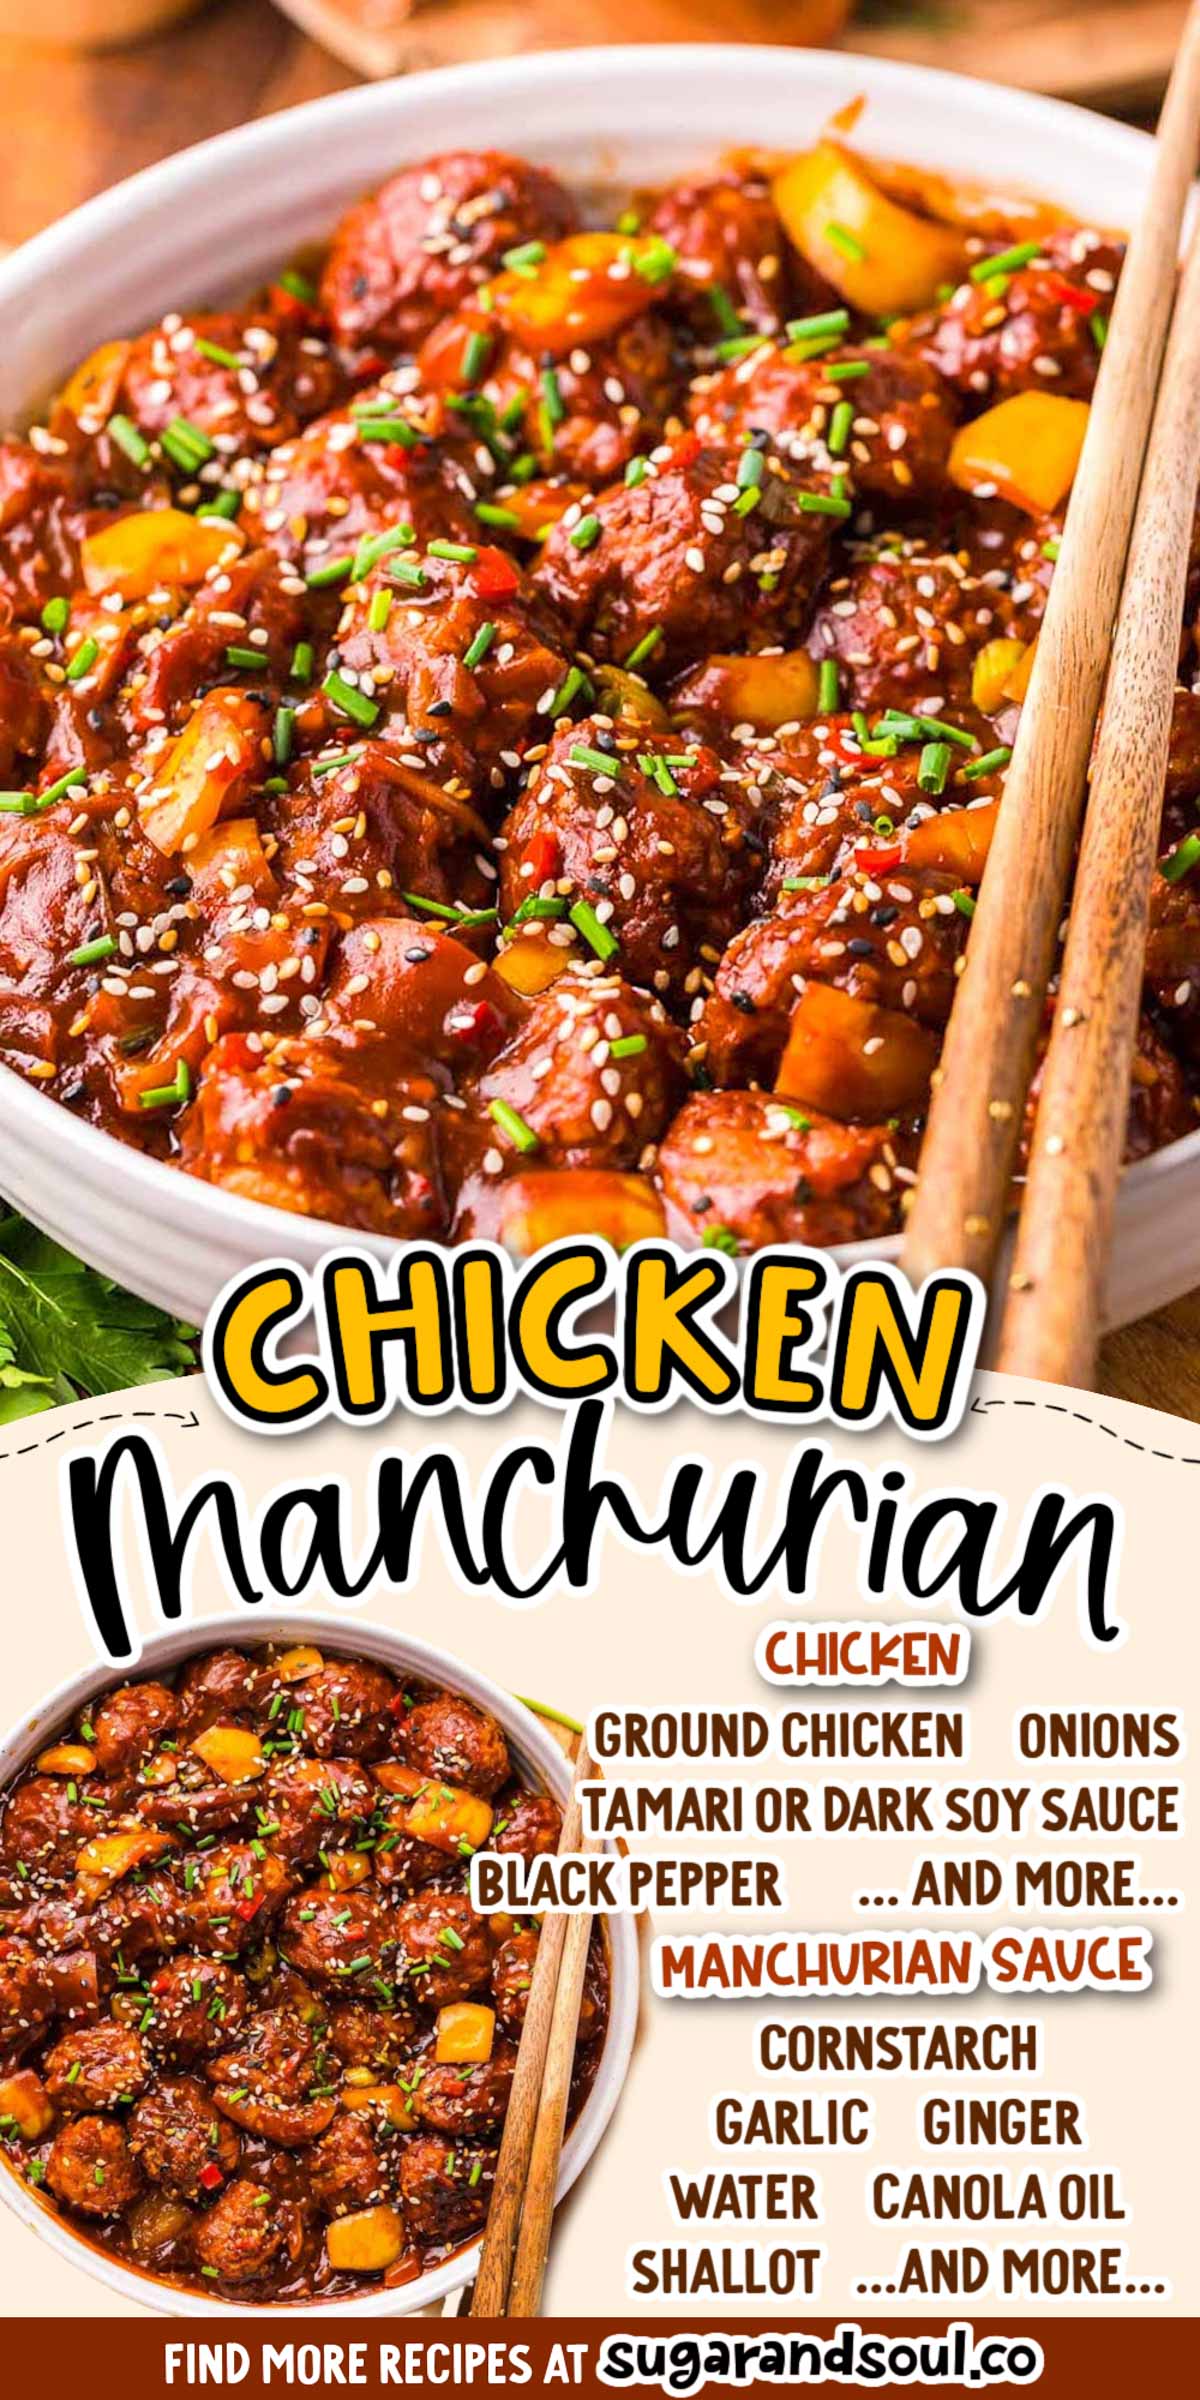 This Chicken Manchurian is a flavor-packed dish that's made with deep-fried ground chicken balls, soya sauce, red chili pepper, and ginger! Prep this mouthwatering dinner option in just 15 minutes! via @sugarandsoulco